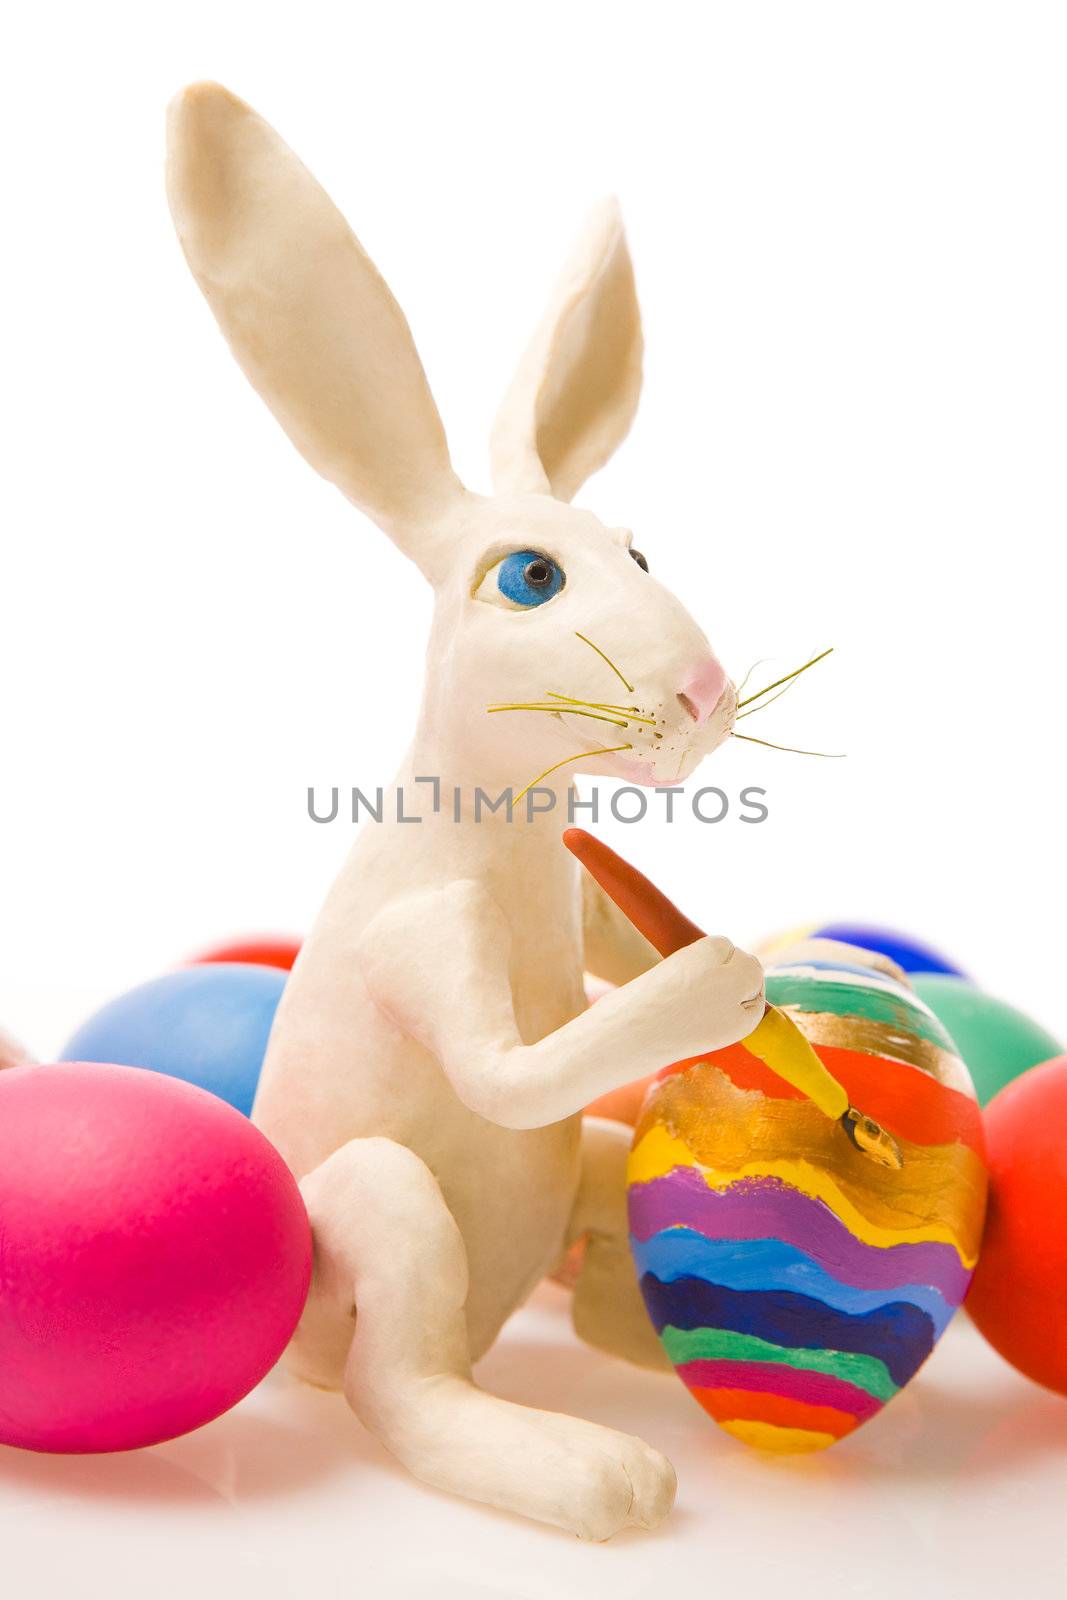 The easter rabbit by Gravicapa